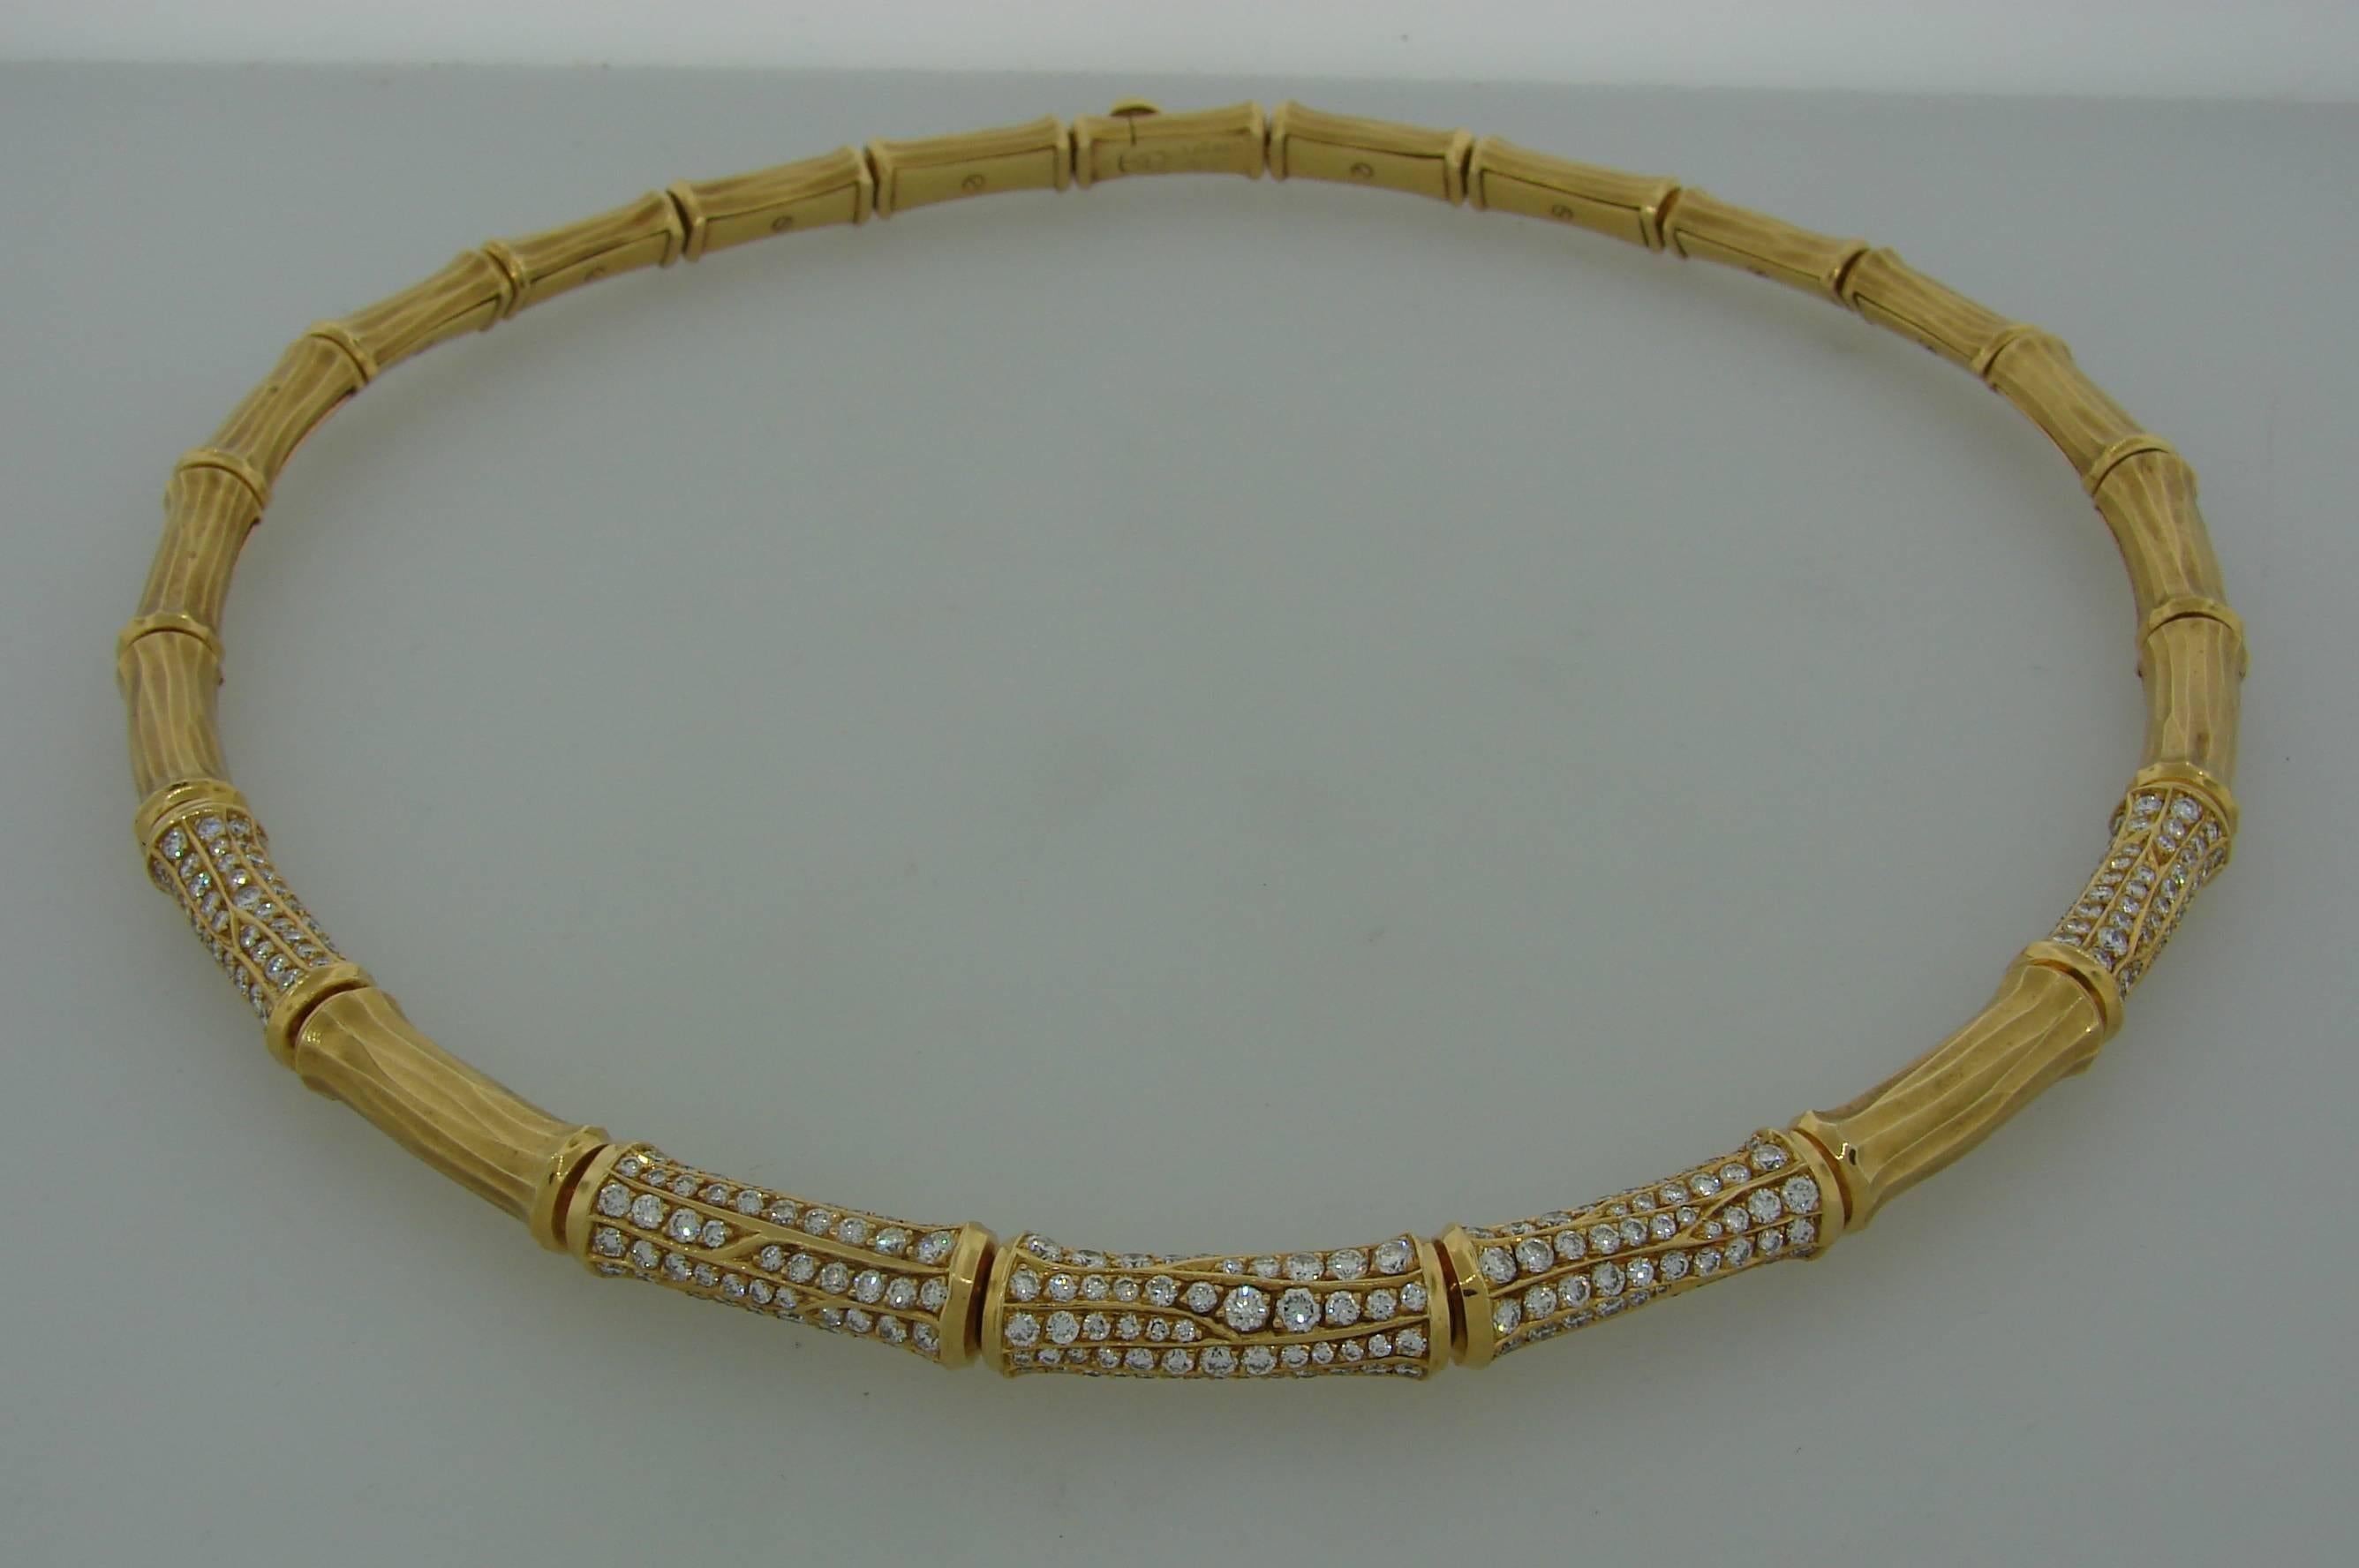 Signature Cartier Bamboo necklace, chic and timeless. It will make a great addition to your jewelry collection.
It is made of 18k yellow gold and set with round brilliant cut diamonds. The diamonds are F-G color, VS1 clarity, total weight